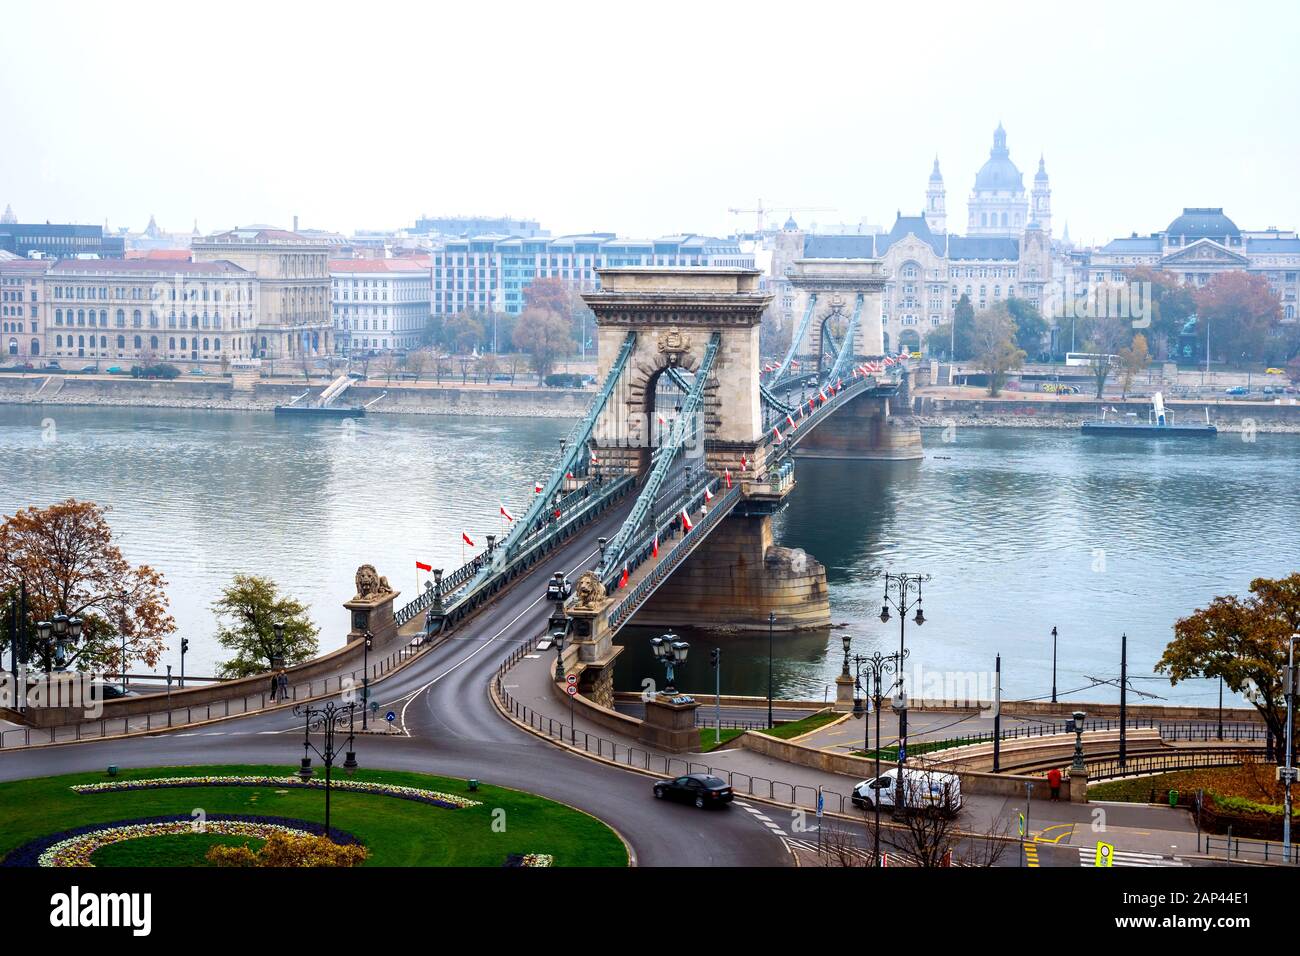 Beautiful view of the Chain Bridge over the Danube river in Budapest Stock Photo